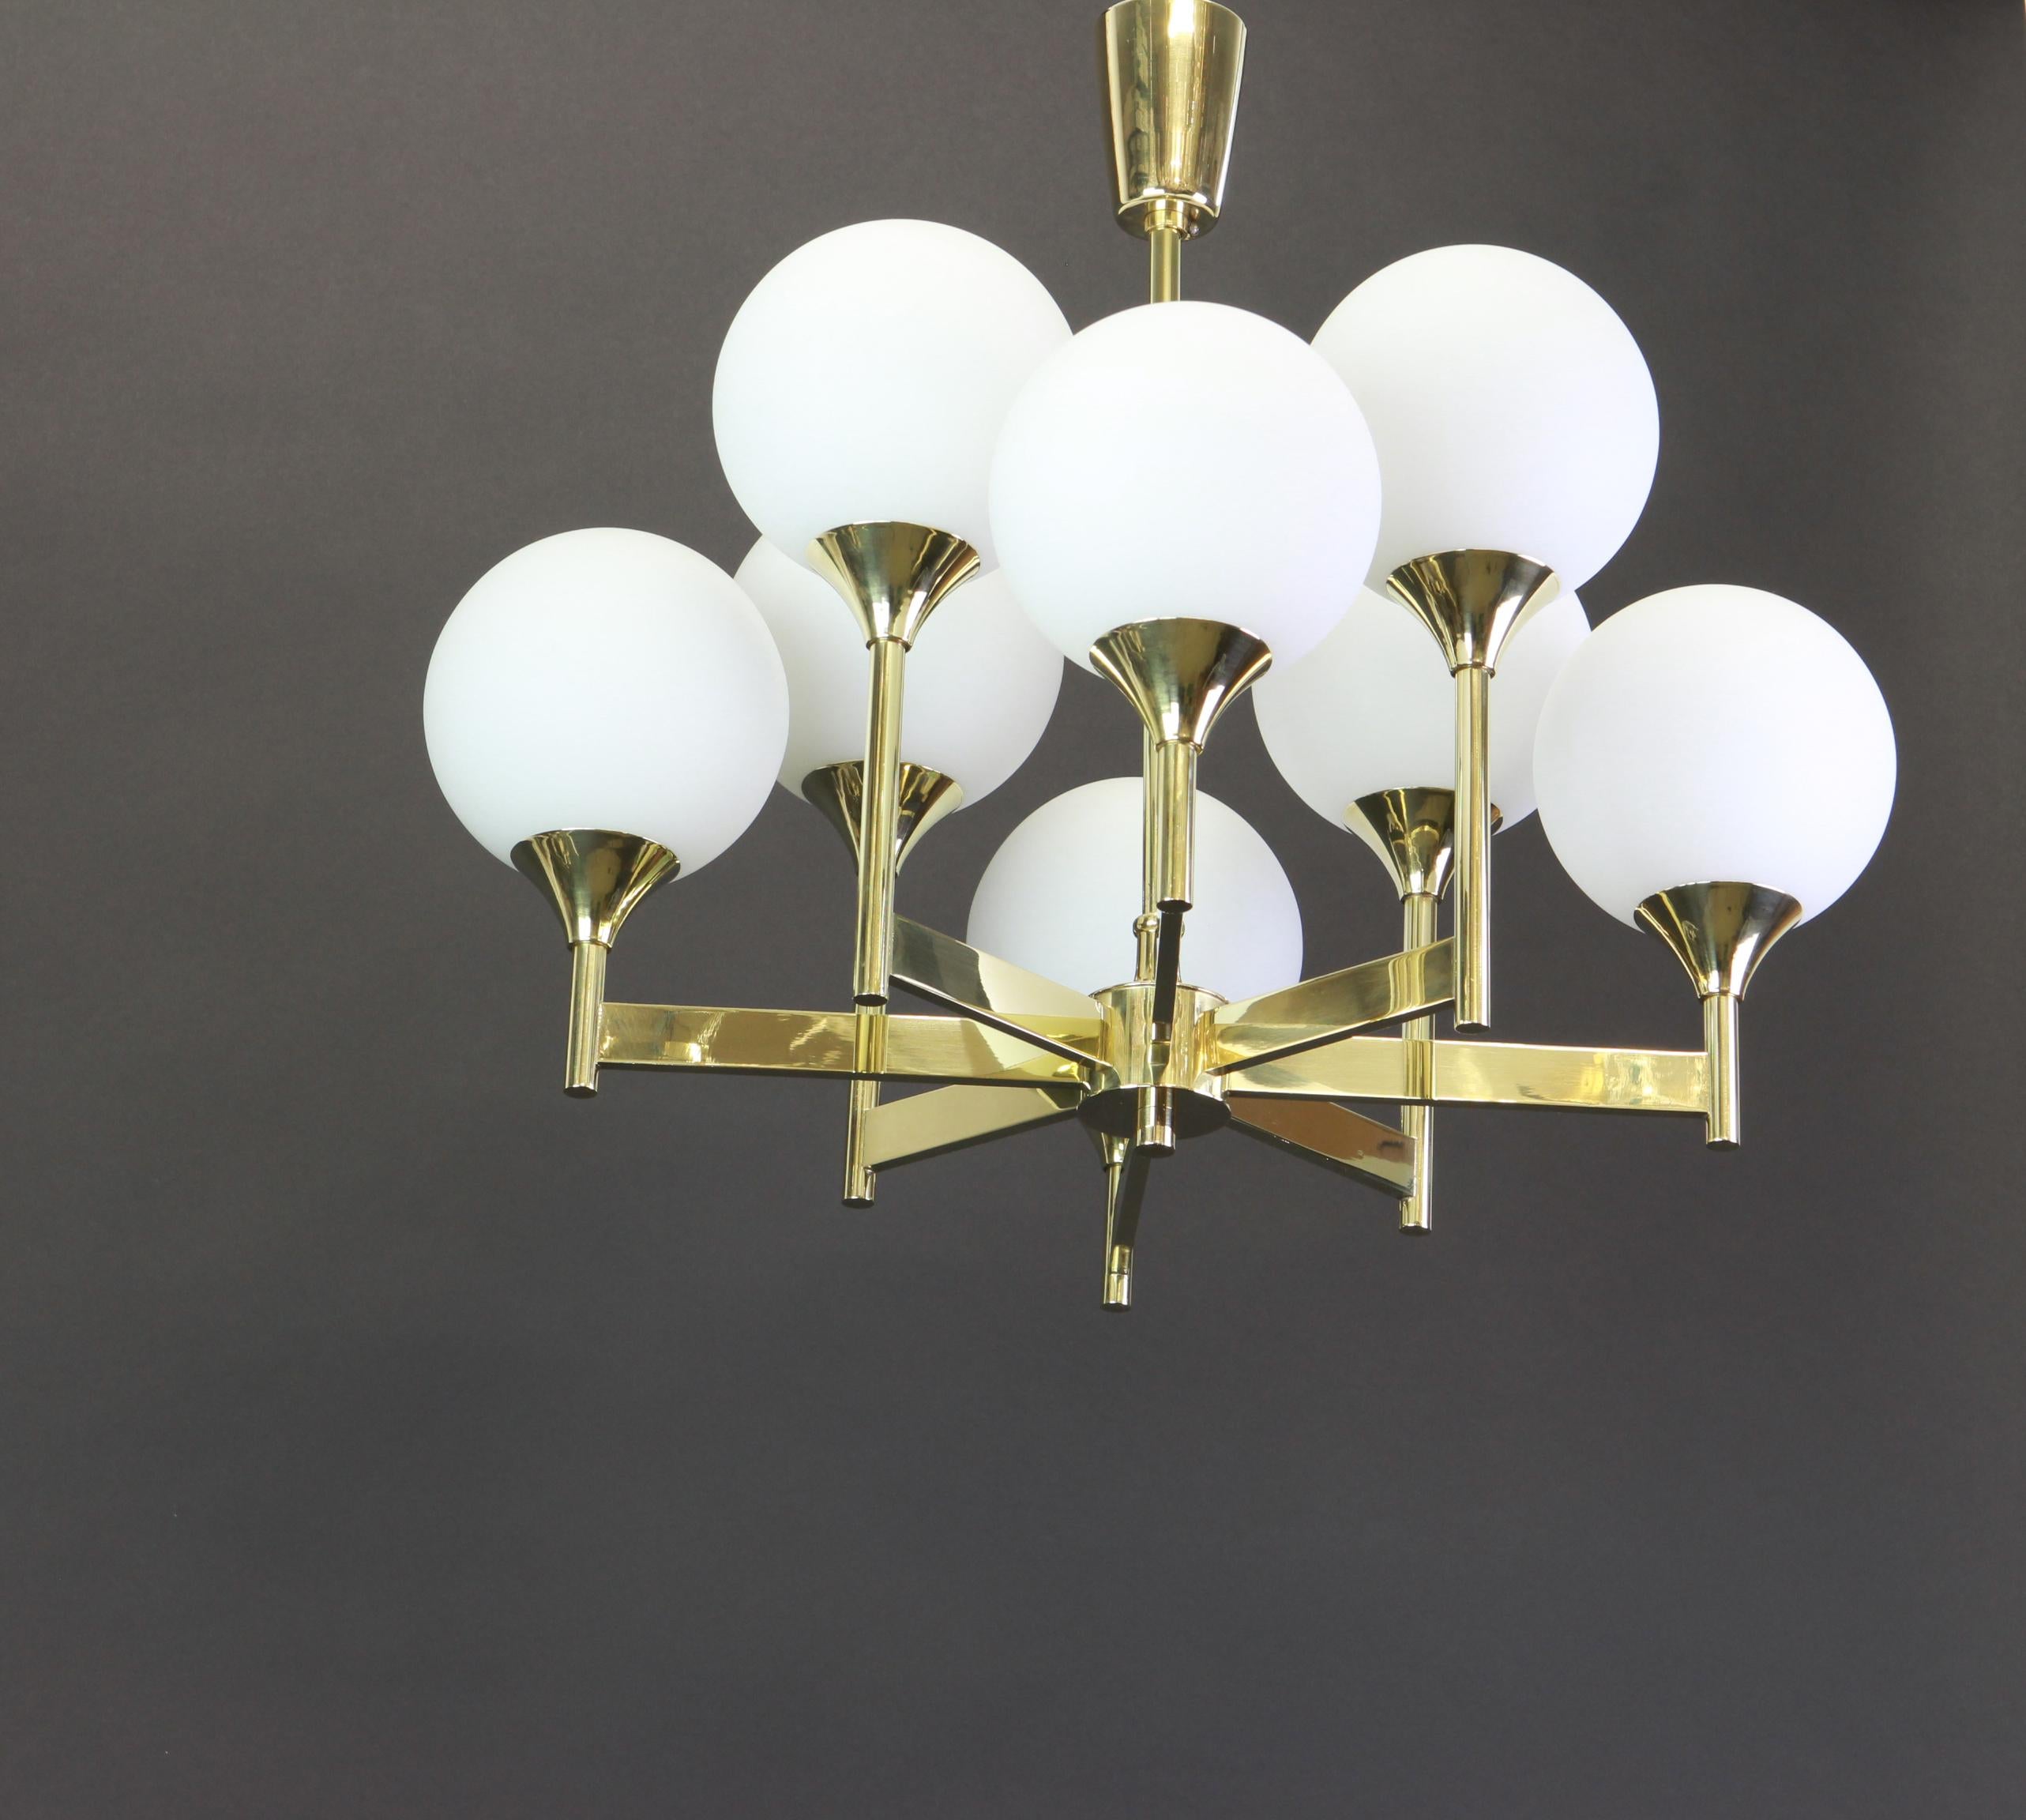 Stunning Sputnik brass chandelier with eight opal glass globes by Kaiser Leuchten, Germany, 1960s.

Heavy quality and in very good condition. Cleaned, well-wired and ready to use. 

The fixture requires eight E14 small bulbs with 40W max each